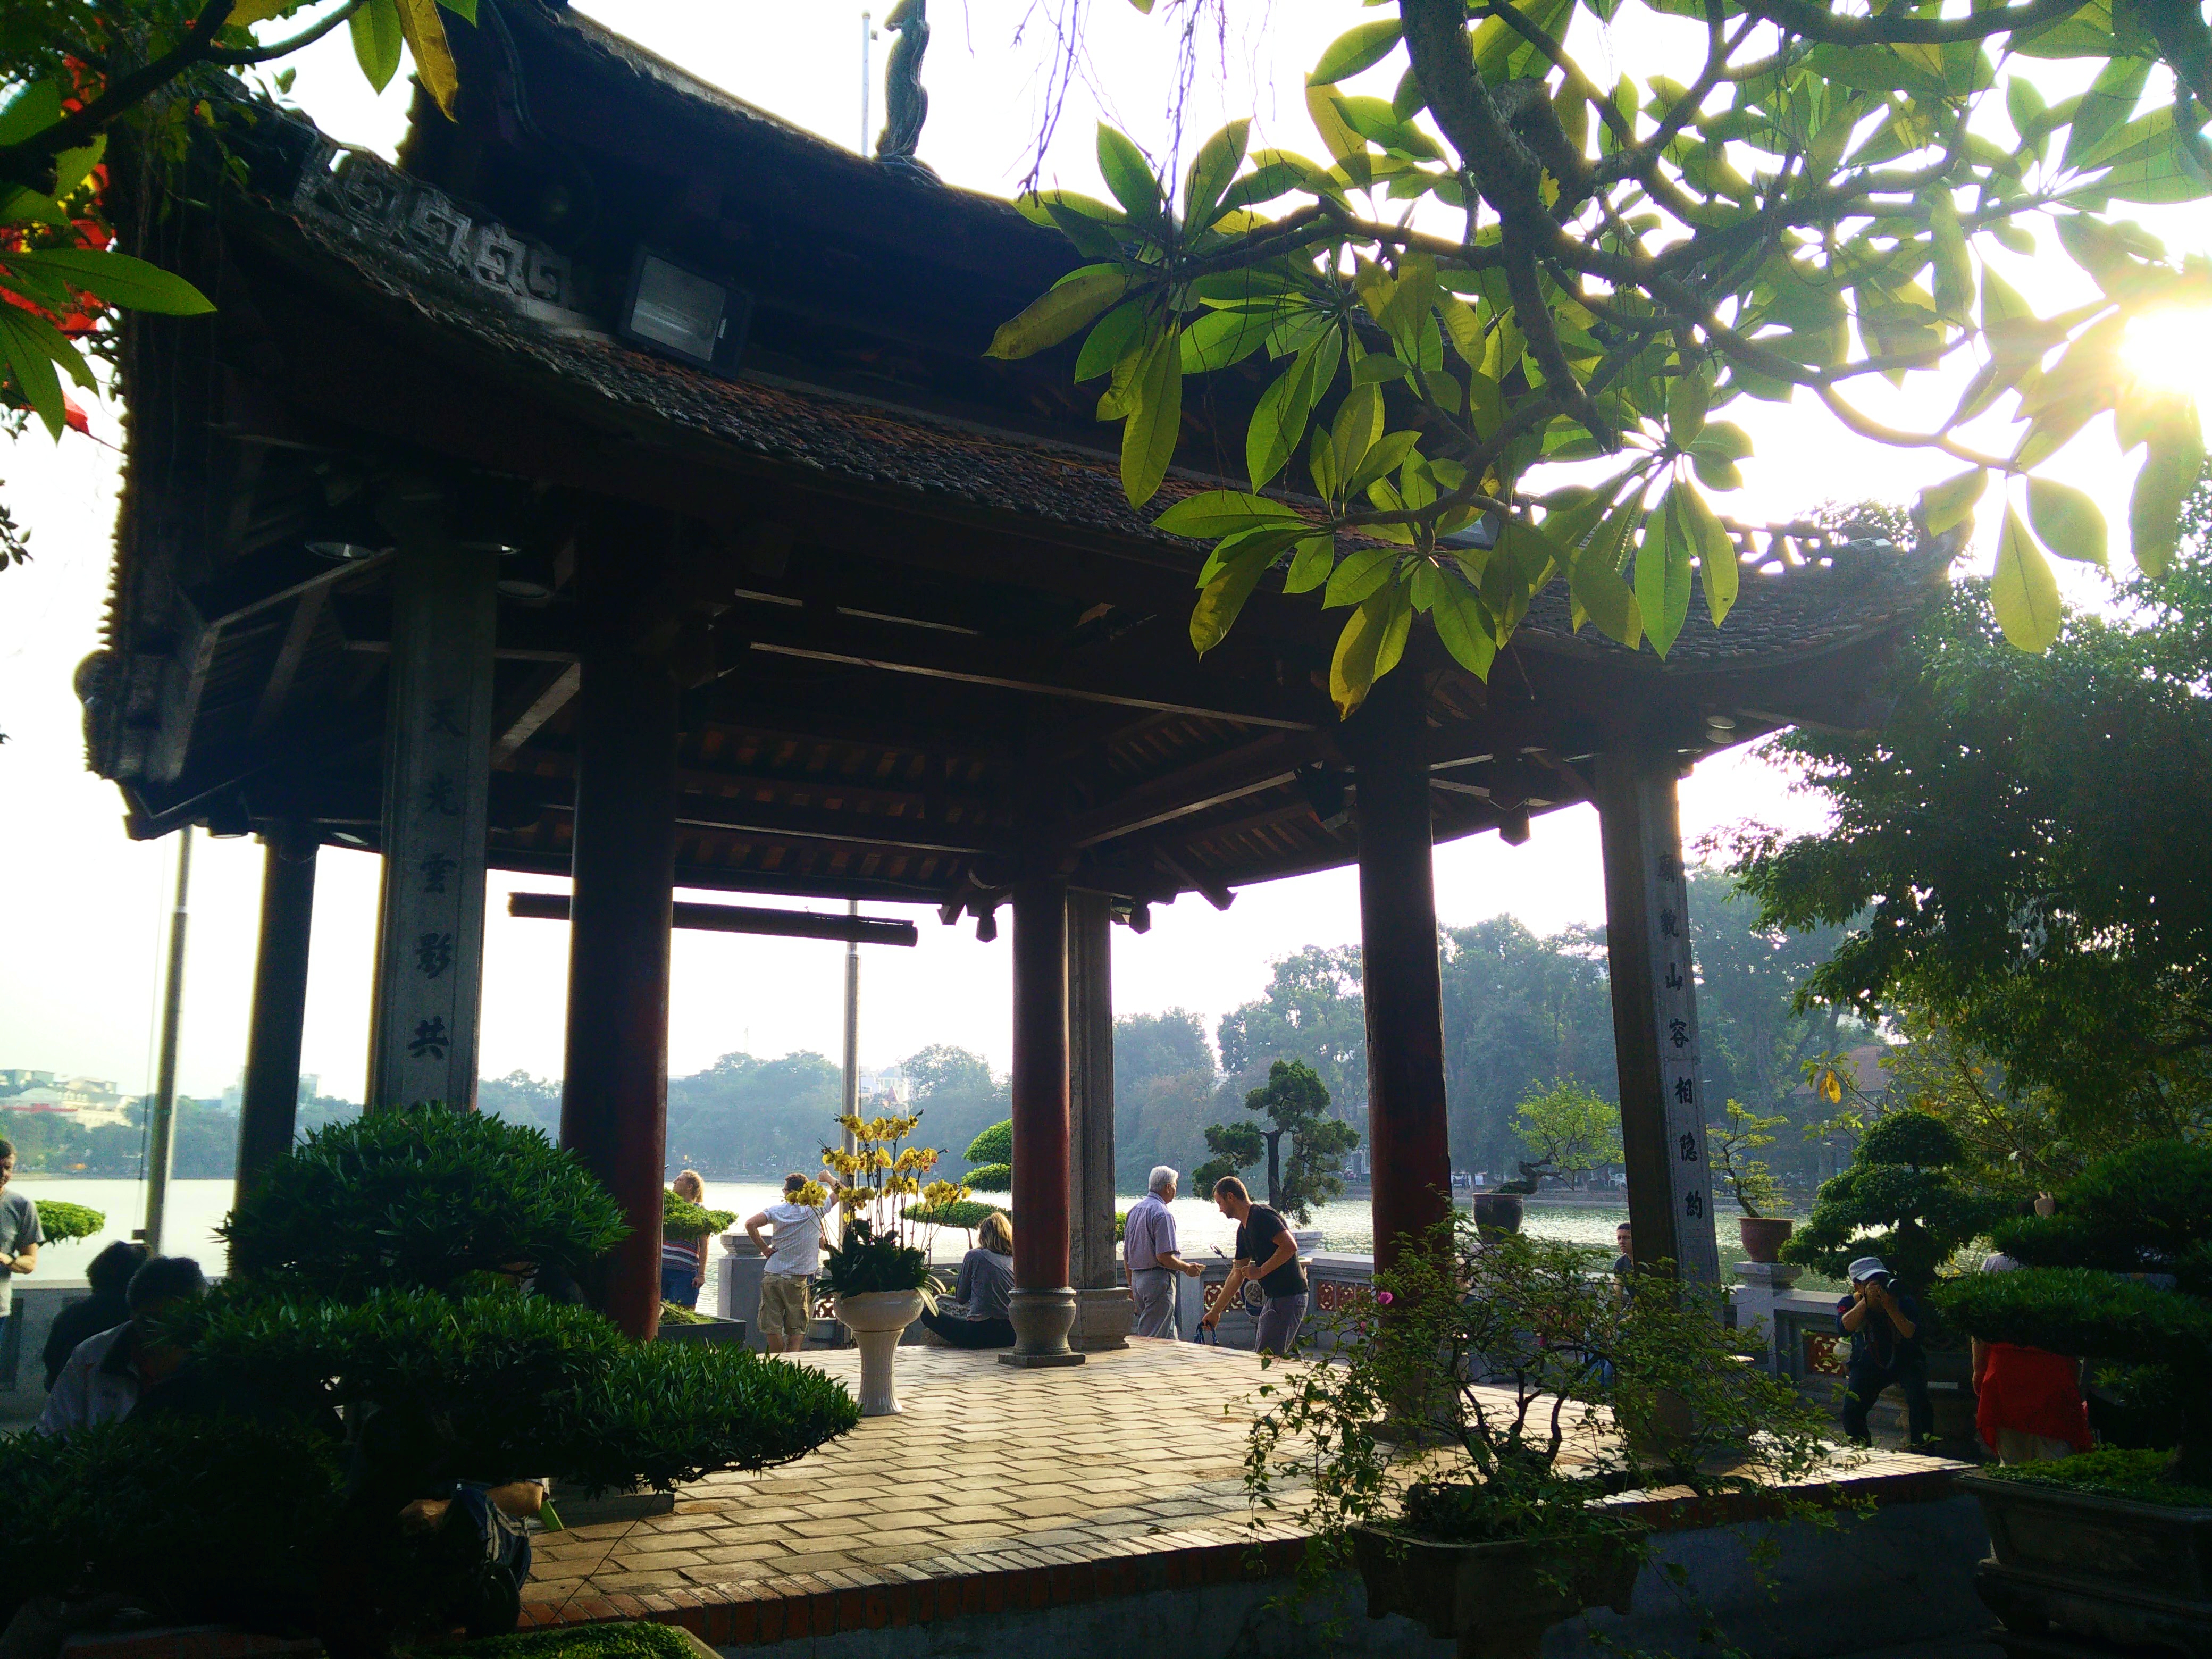 Ngoc Son temple in the middle of Hoan Kiem lake